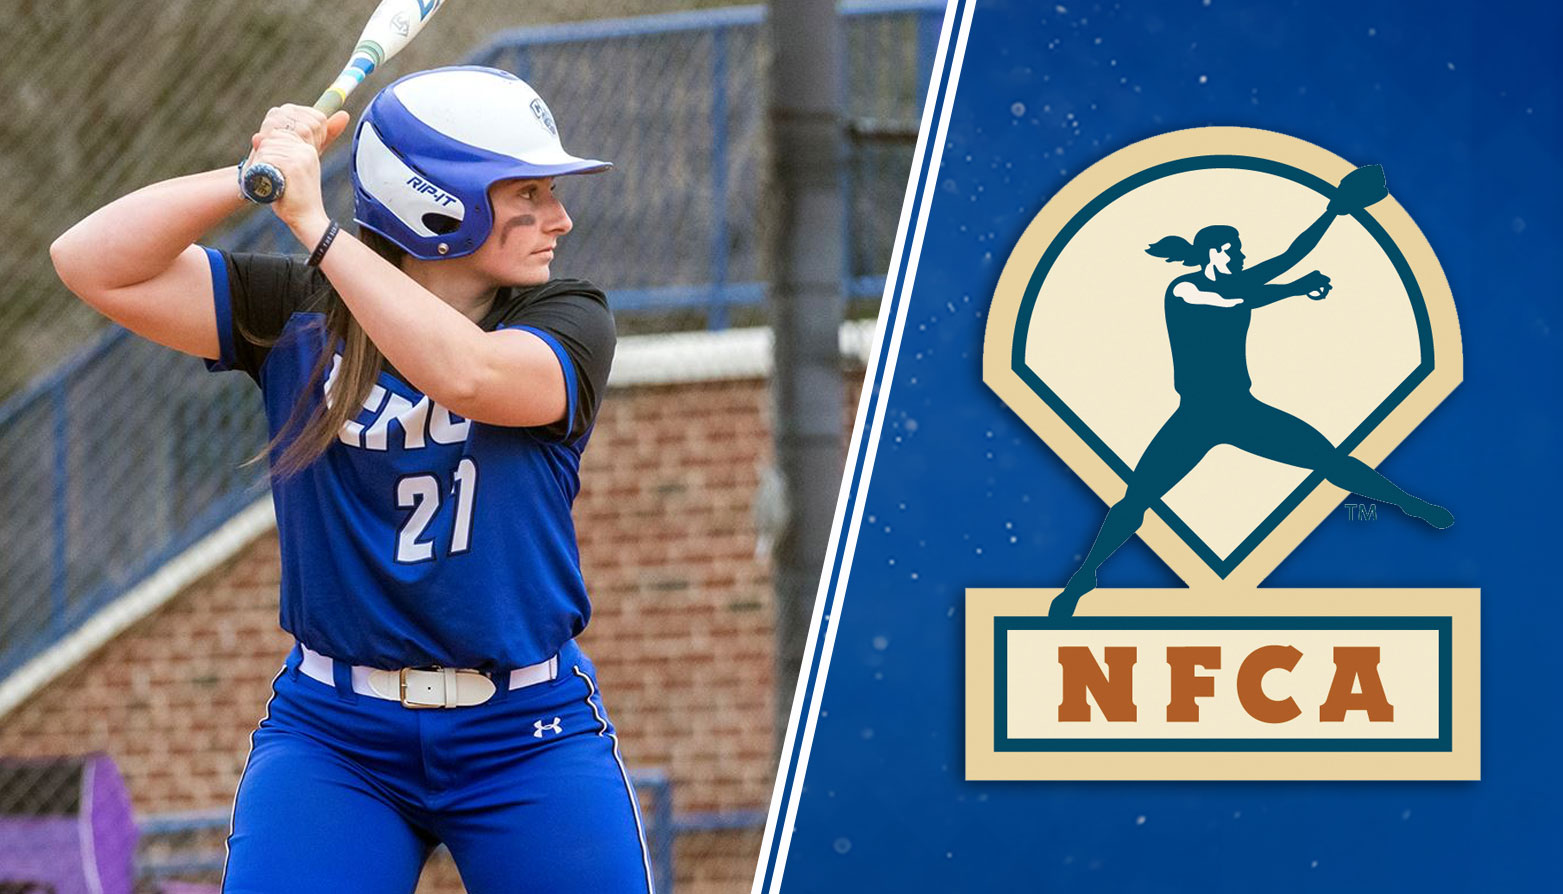 Christopher Newport’s Hasty Selected 2019 Schutt Sports/NFCA Division III National Freshman of Year